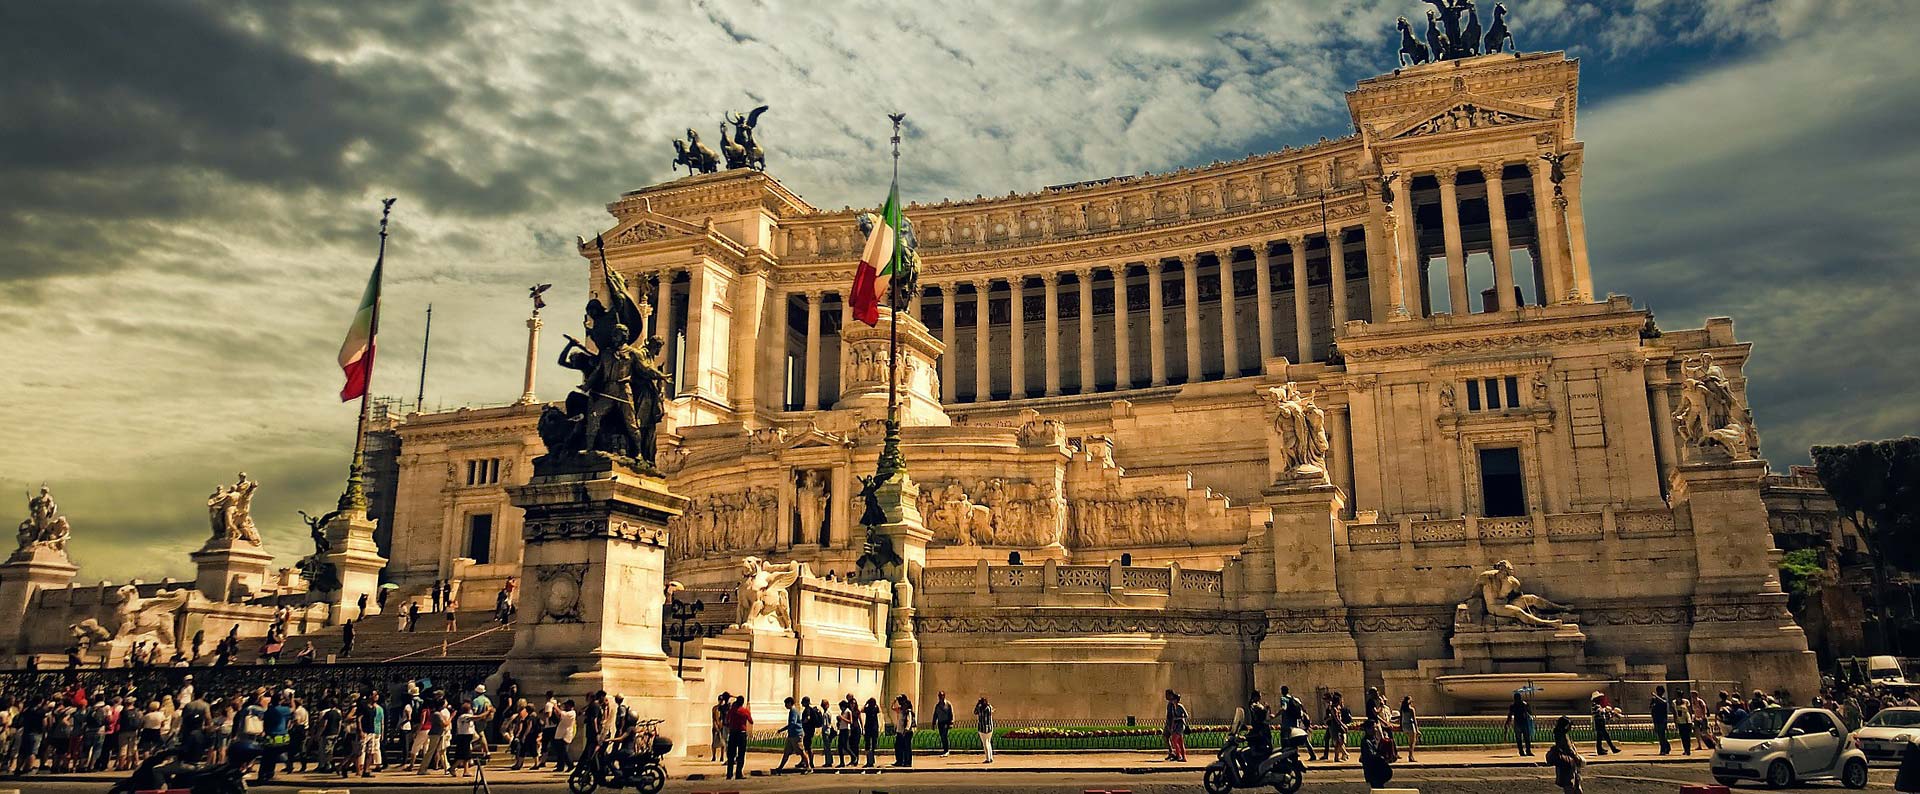 Discounted flight tickets from New York to Rome - IFlyFirstClass